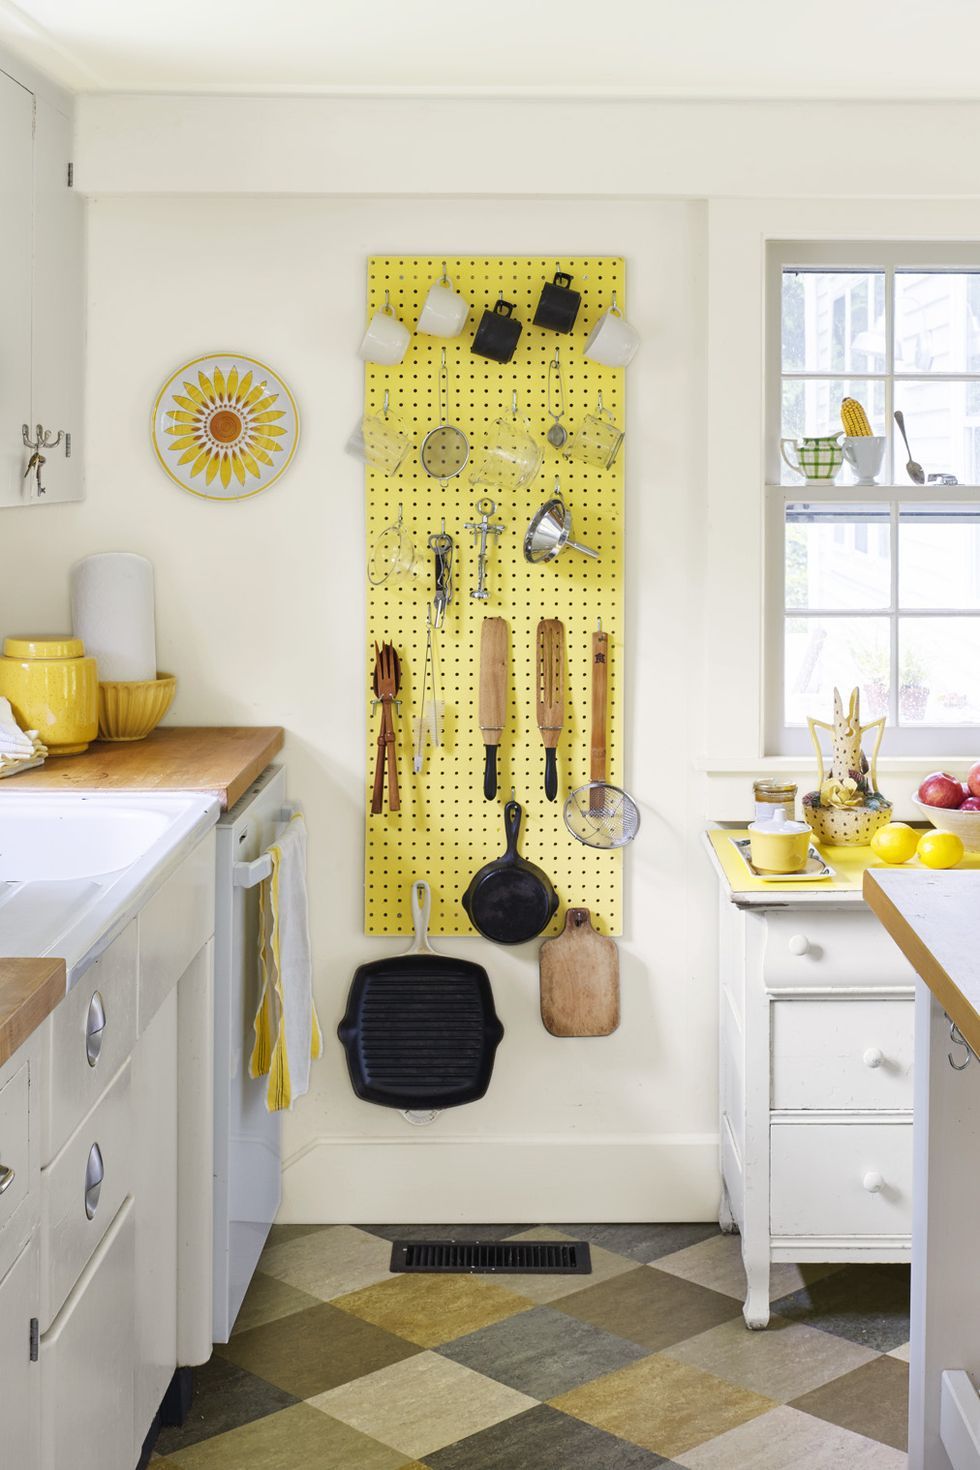 https://hips.hearstapps.com/hmg-prod/images/small-kitchen-ideas-pegboard-1642002746.jpeg?crop=1xw:1xh;center,top&resize=980:*